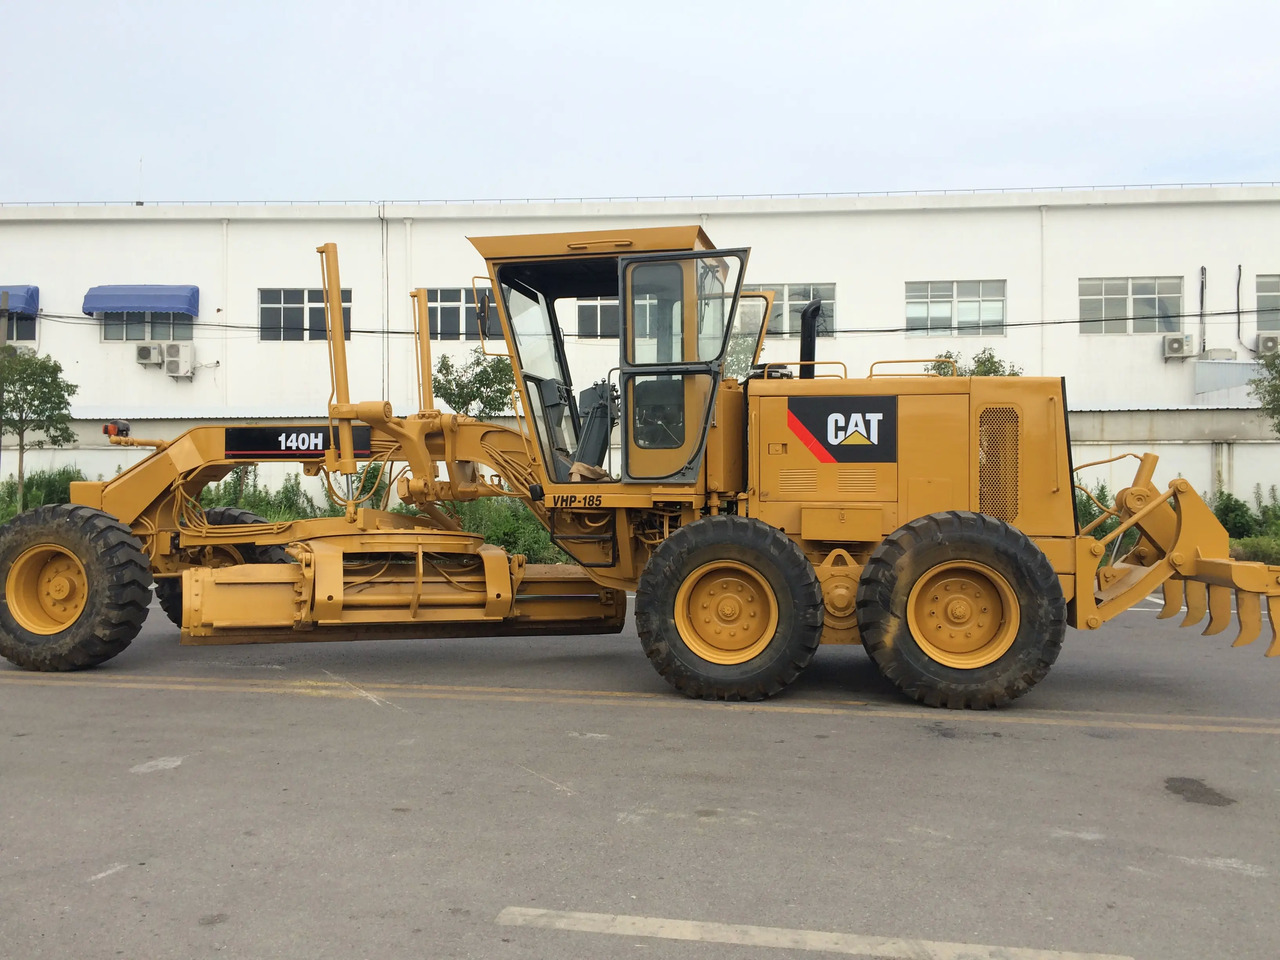 Niveleuse Hot sale Used Cat 140H motor grader with good condition,USED heavy equipment used motor grader CAT 140H grader in China: photos 5